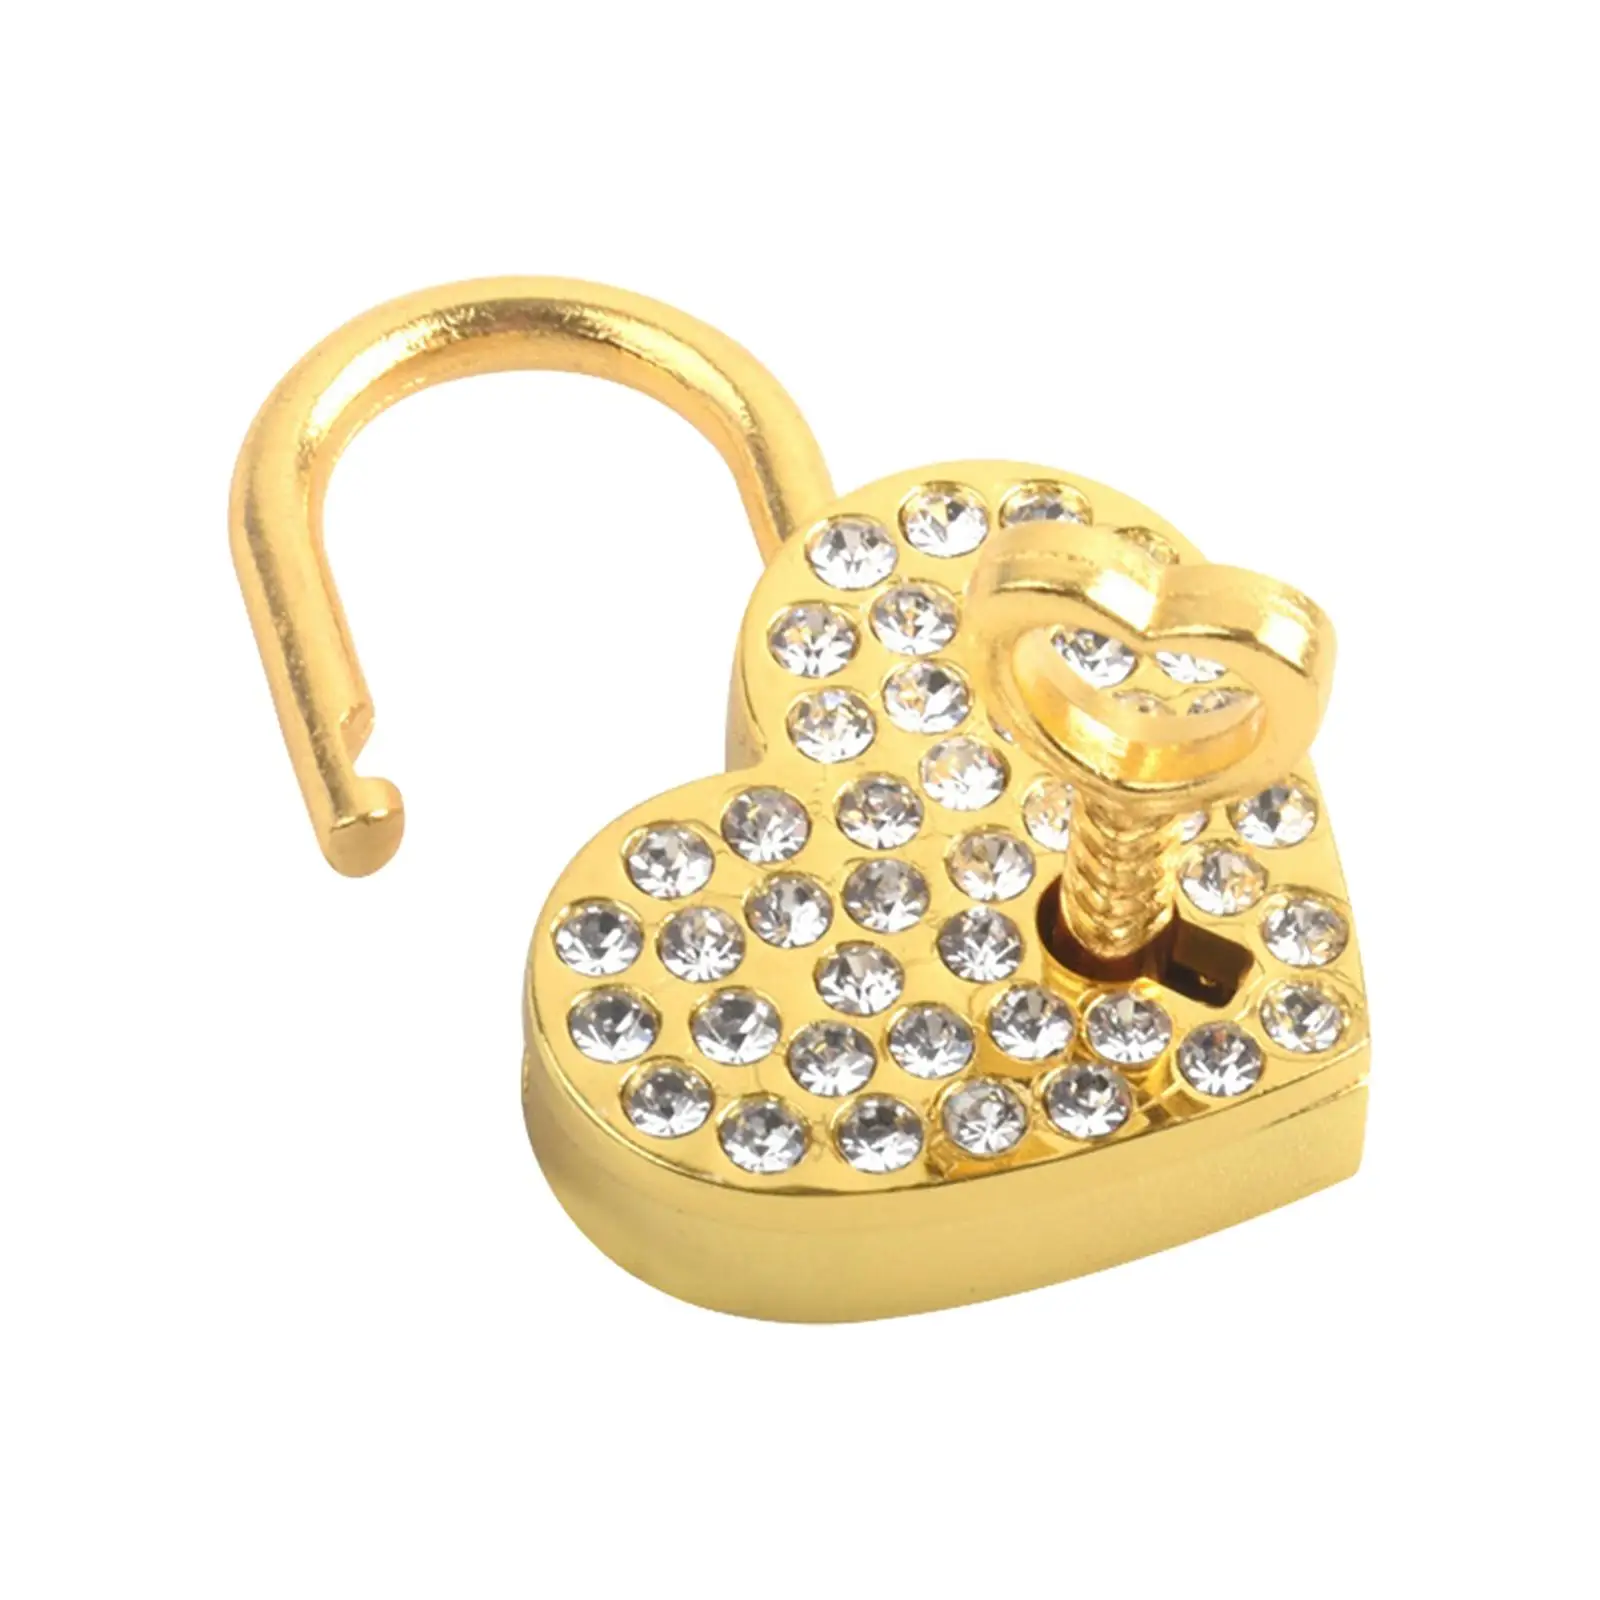 Small Lock Retro with Engraved Padlock for Wedding Security Travel Gym